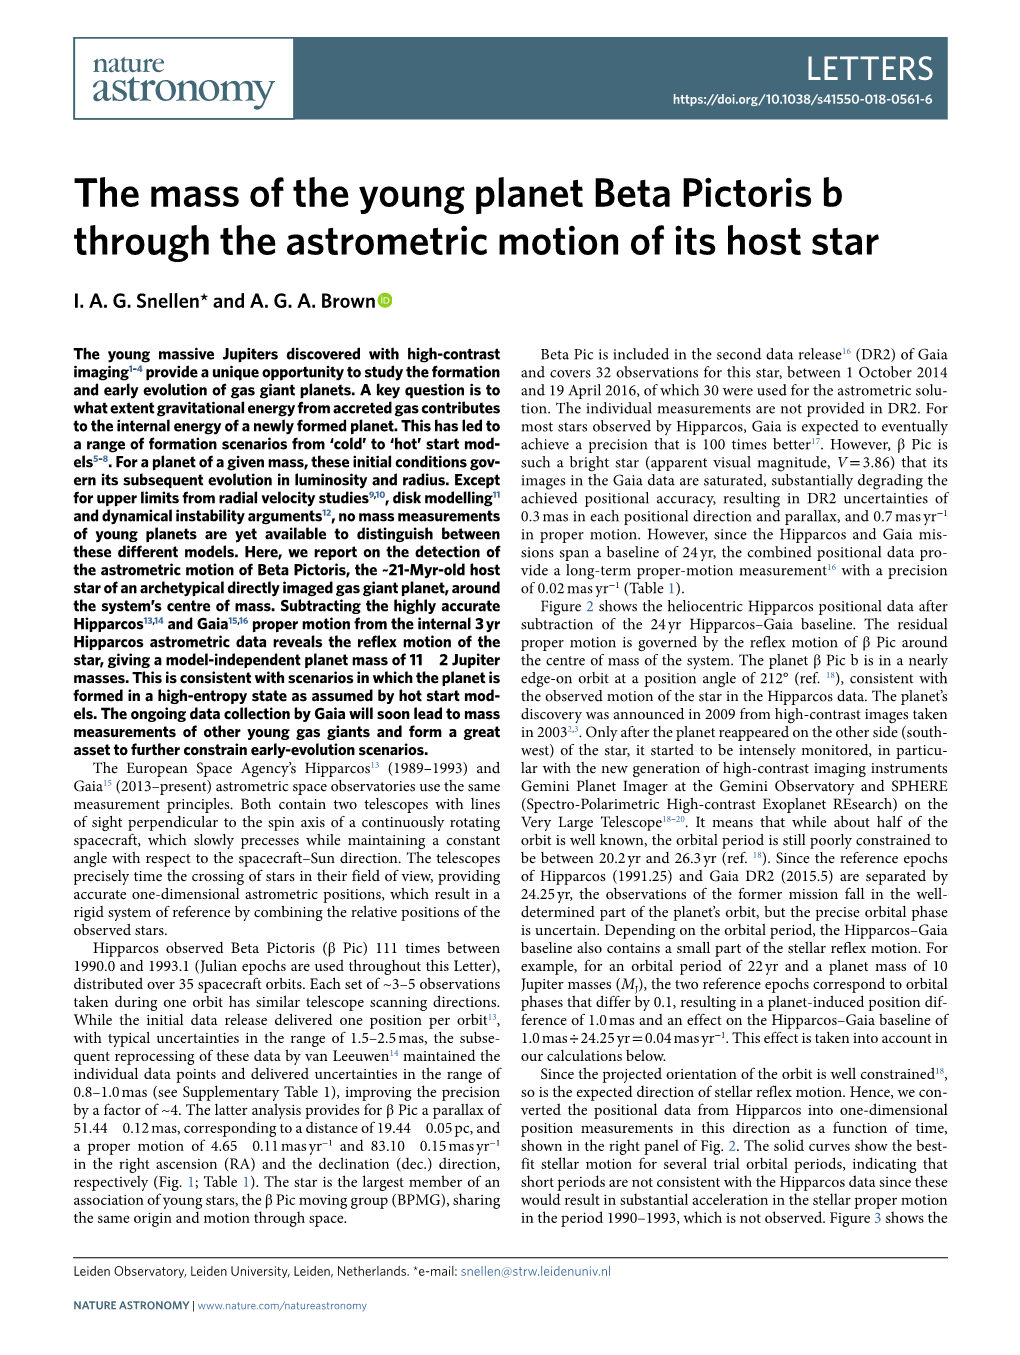 The Mass of the Young Planet Beta Pictoris B Through the Astrometric Motion of Its Host Star